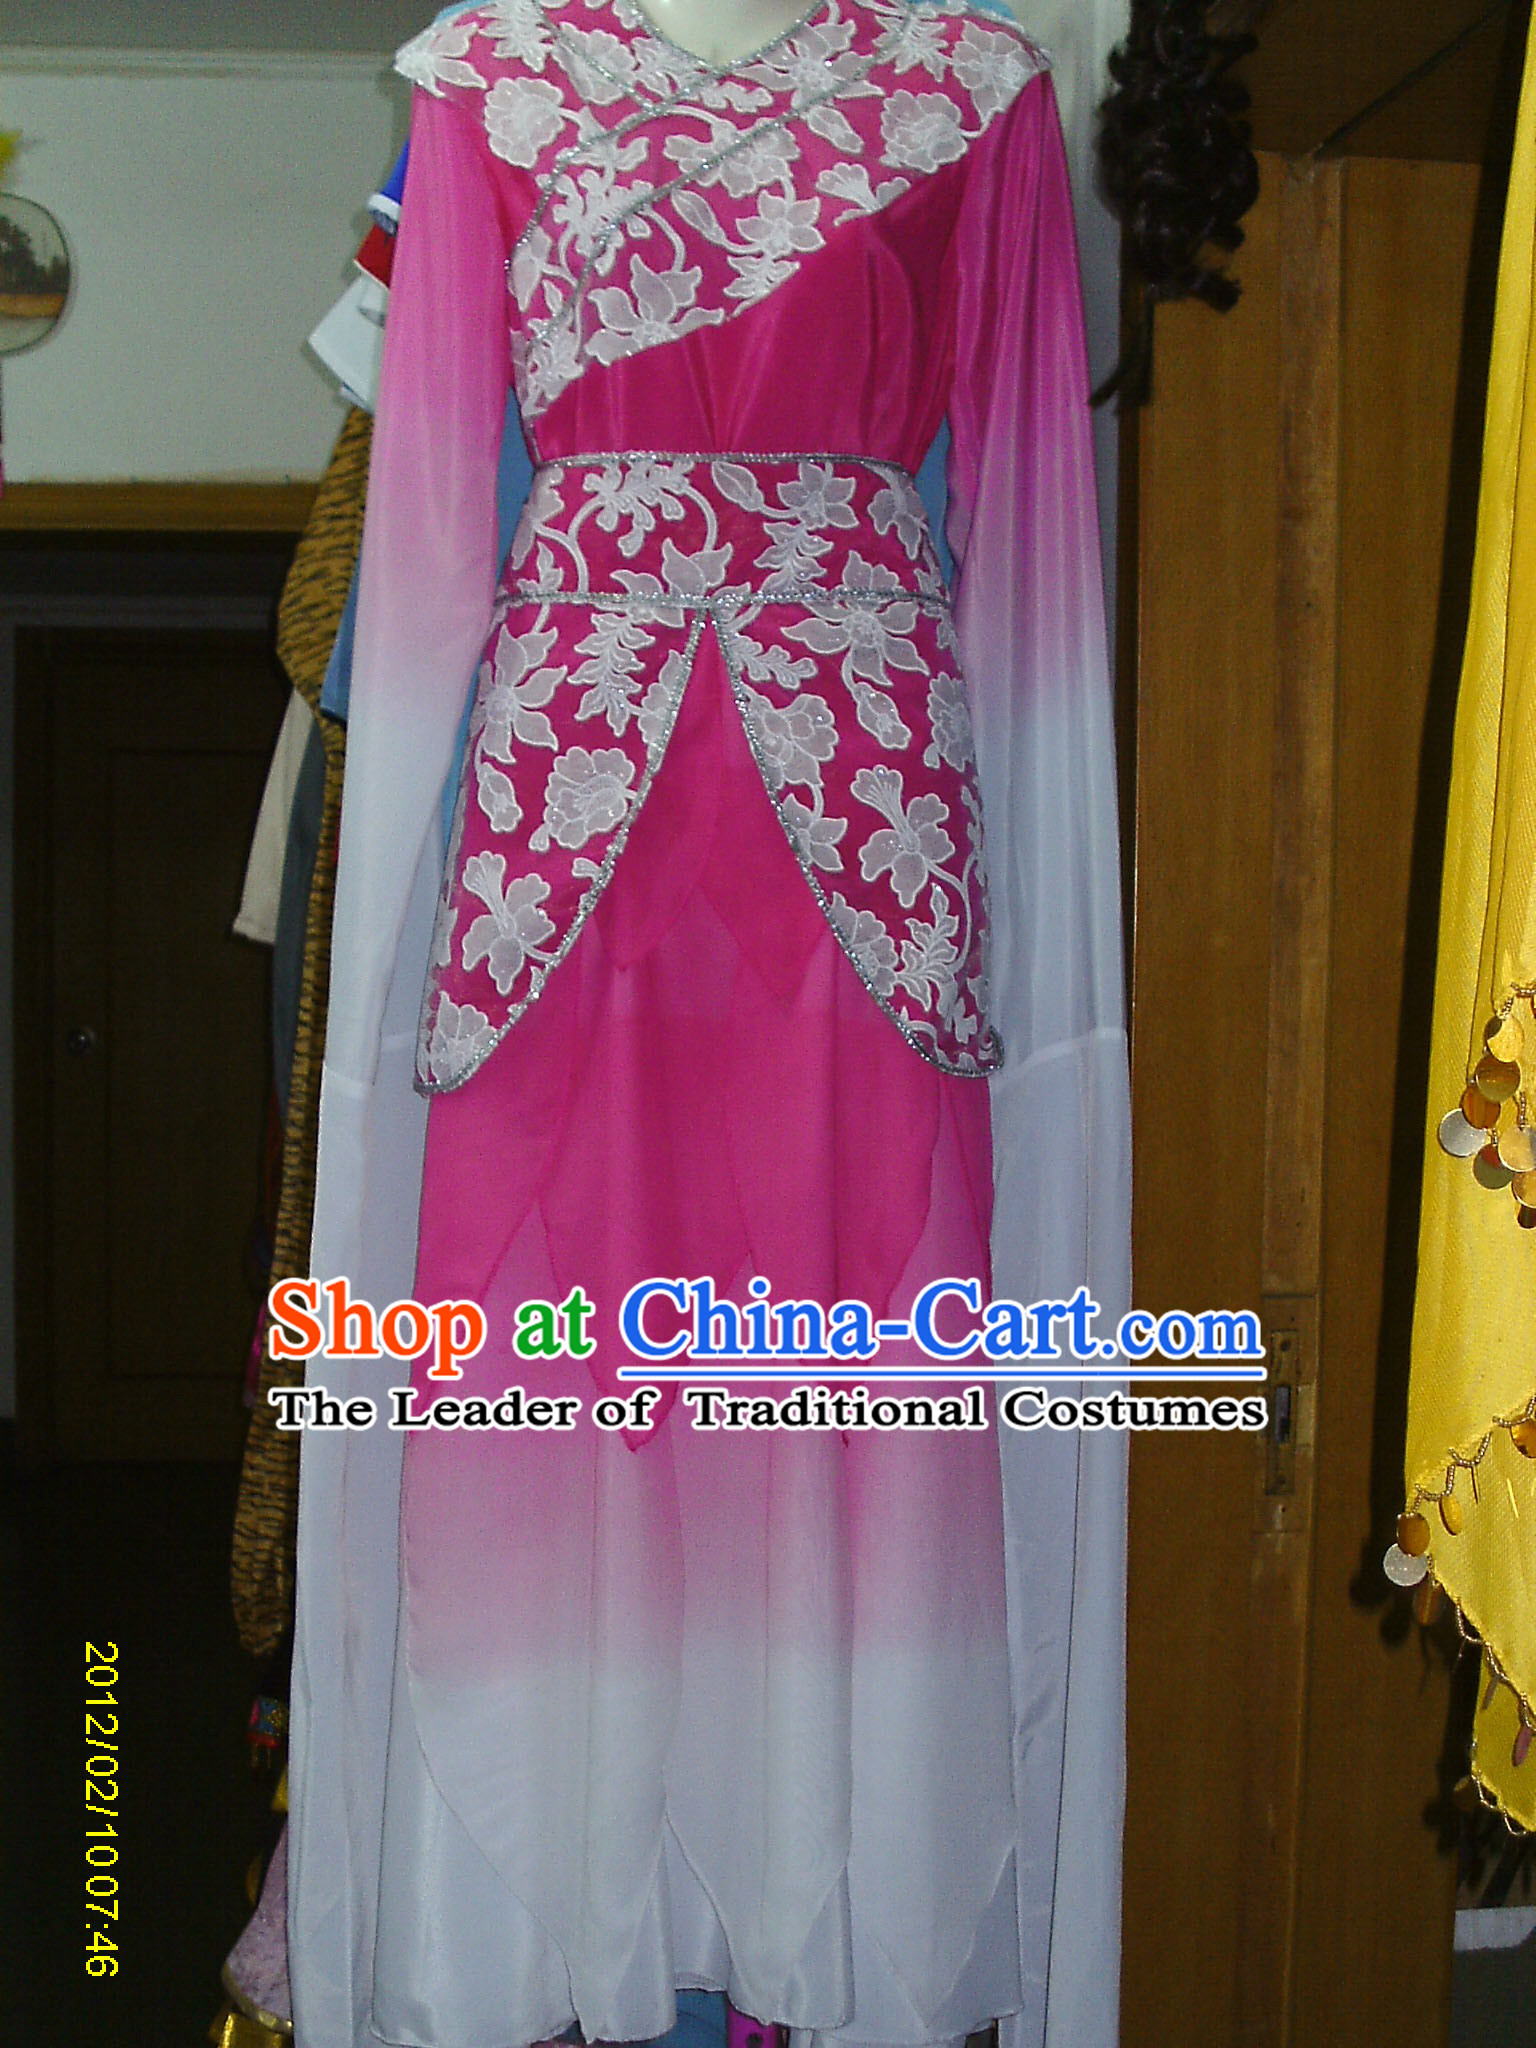 Water Sleeves Chinese Classic Dance Costume Competition Costumes Set